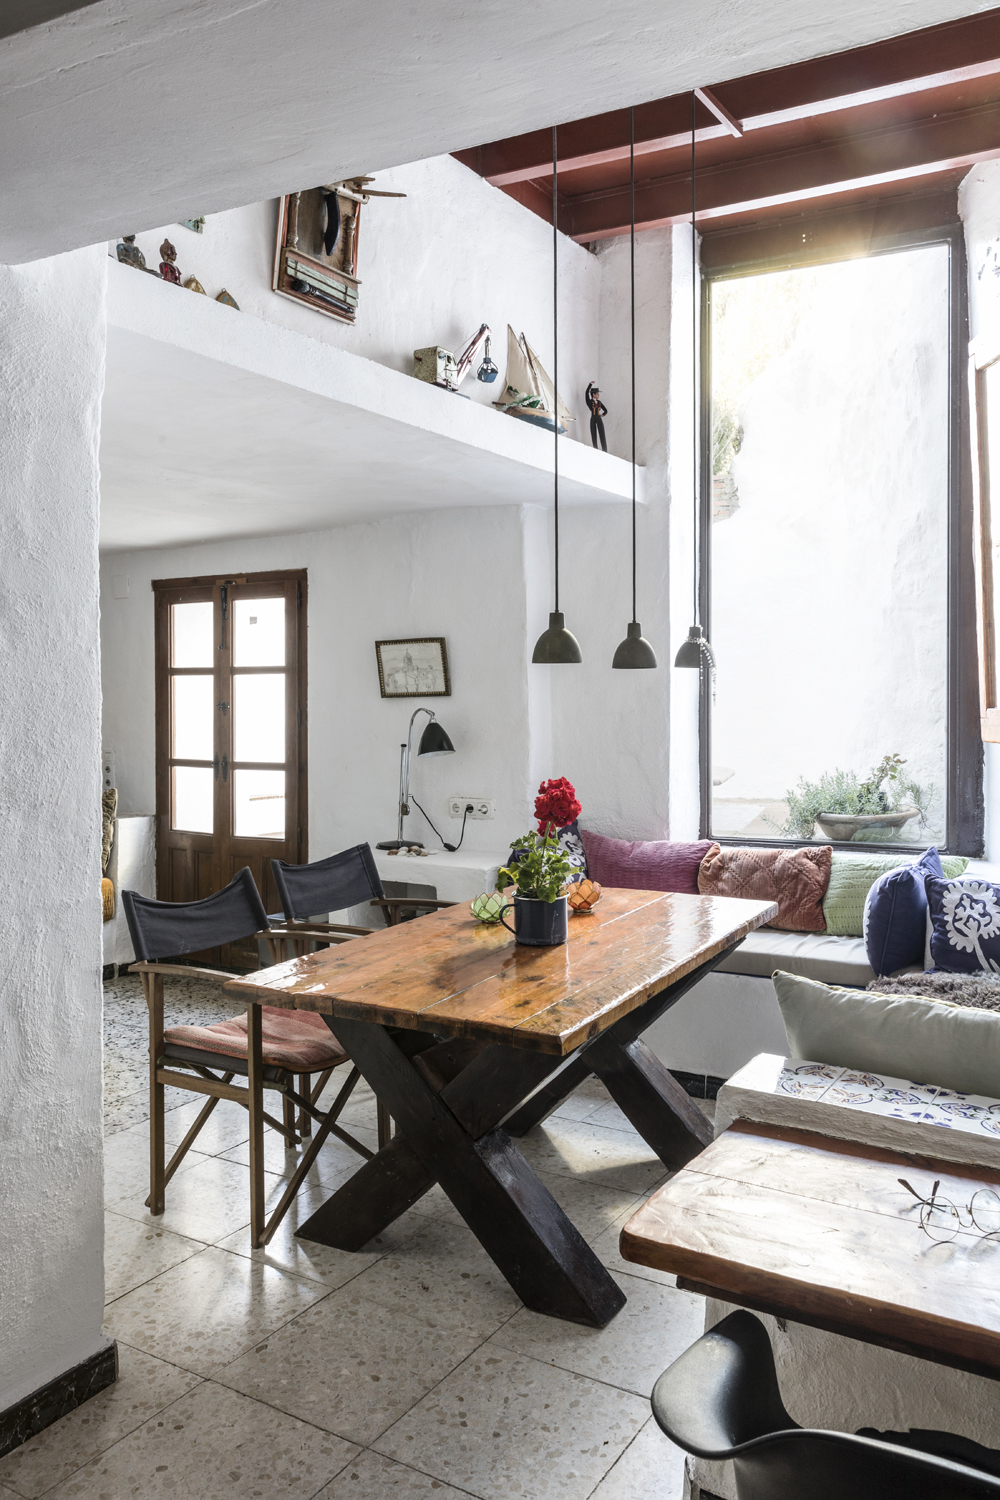 Canillas de Aceituno, Spain, holiday, rent, apartment, townhouse, rental, vacationhome, home, interior, spanish, style, interiorphotography, interior design, photographer, Frida Steiner, Visualaddict, visualaddictfrida, kitchen, dining, diningroom, diningtable, benches, pillows, colorful interior